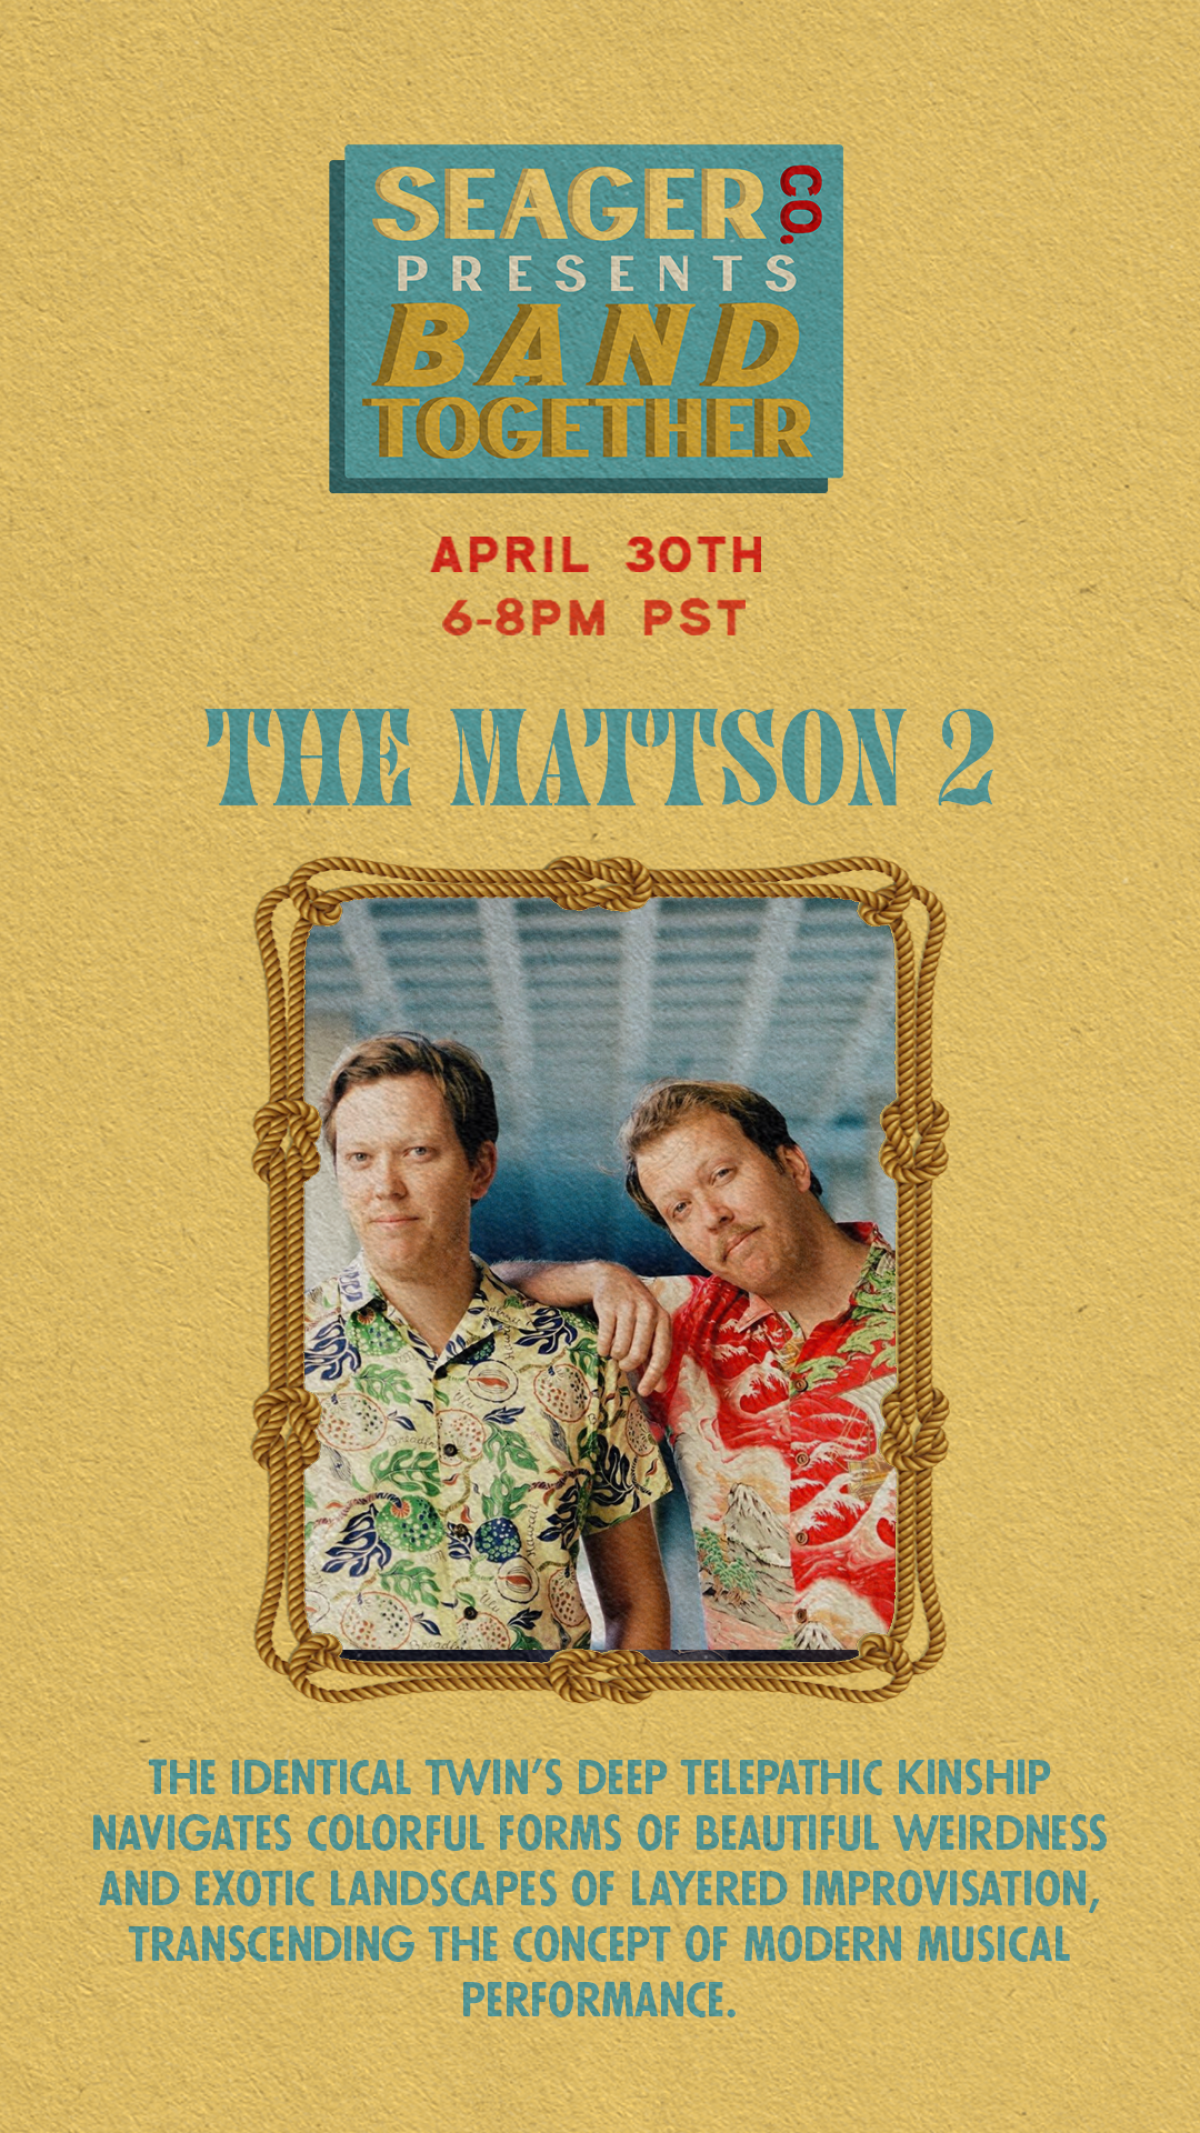 One of the lineup posters, featuring a photo and bio of The Mattson 2